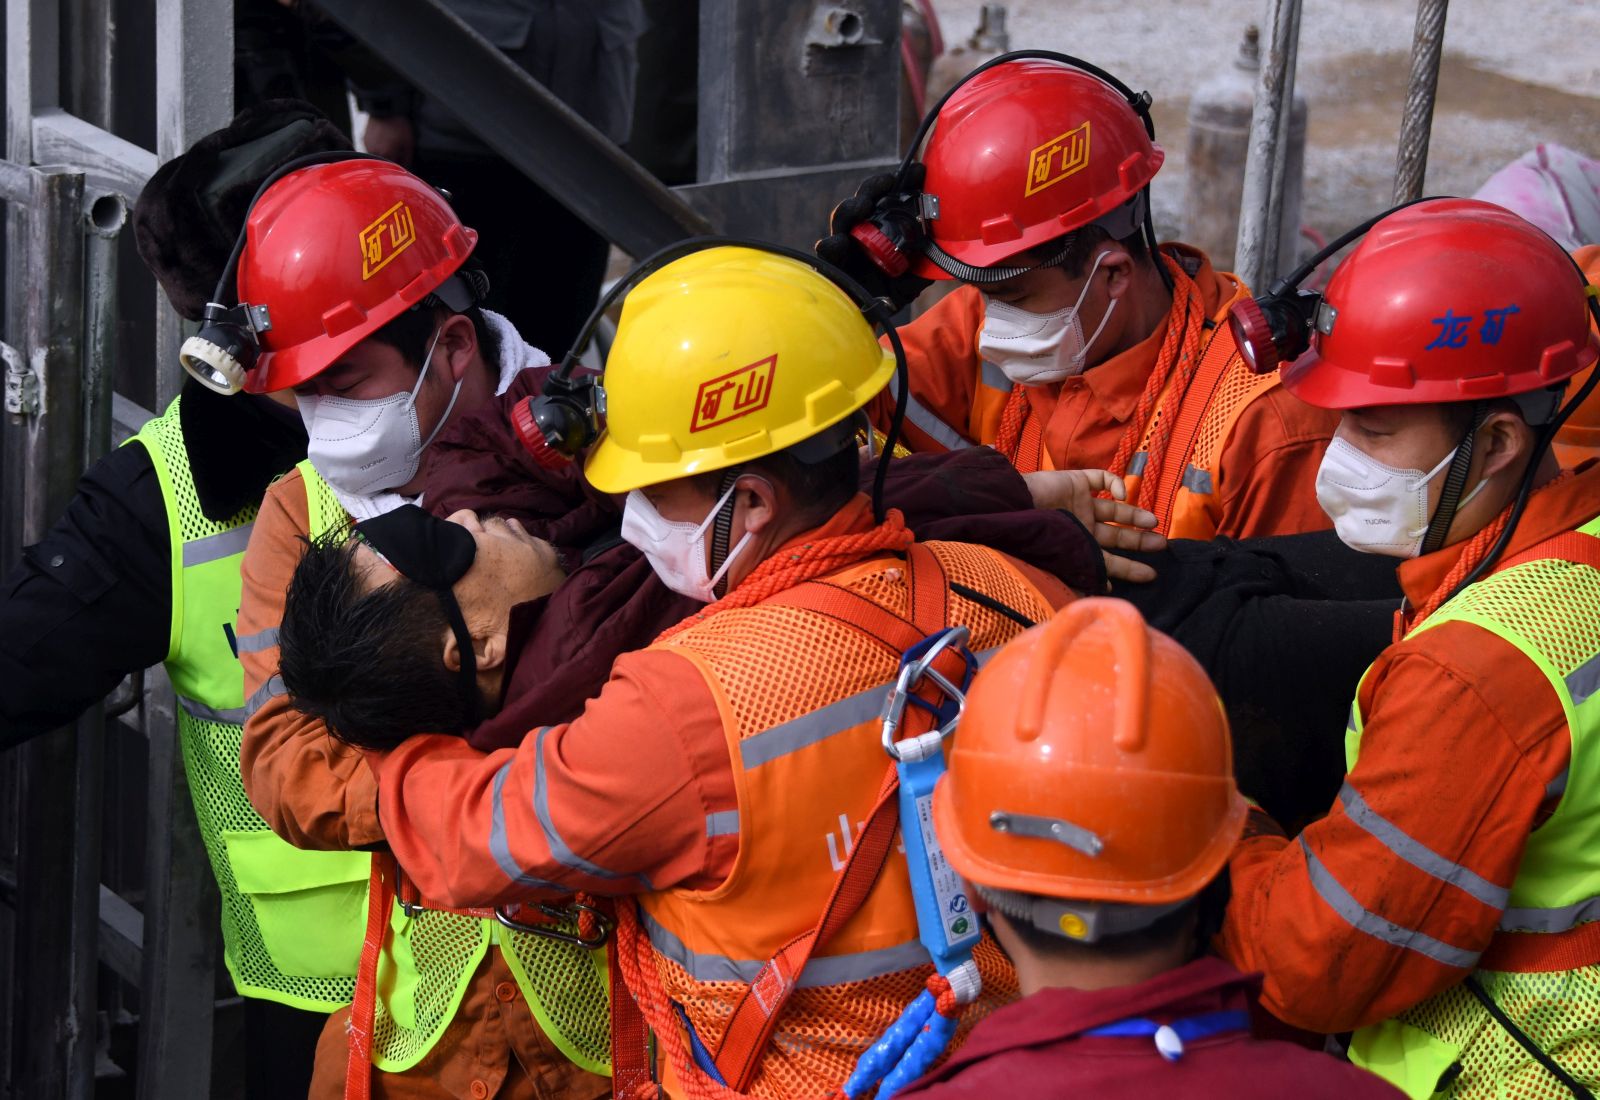 epa08961562 A picture released by Xinhua News Agency shows a trapped miner being lifted from a gold mine in Qixia City, east China's Shandong Province, 24 January 2021. The miner, who has been trapped underground for two weeks after a blast in a gold mine, was found by rescuers on 24 January morning that who is in extremely weak condition, was lifted from the mine at 11:13 a.m. on 24 January 2021. As many as twenty-two miners have been trapped about 600 meters underground since the mine blast on 10 January 2021 in Qixia, east China's Shandong Province.  EPA/CHEN HAO/XINHUA -- MANDATORY CREDIT: XINHUA --  EDITORIAL USE ONLY/NO SALES